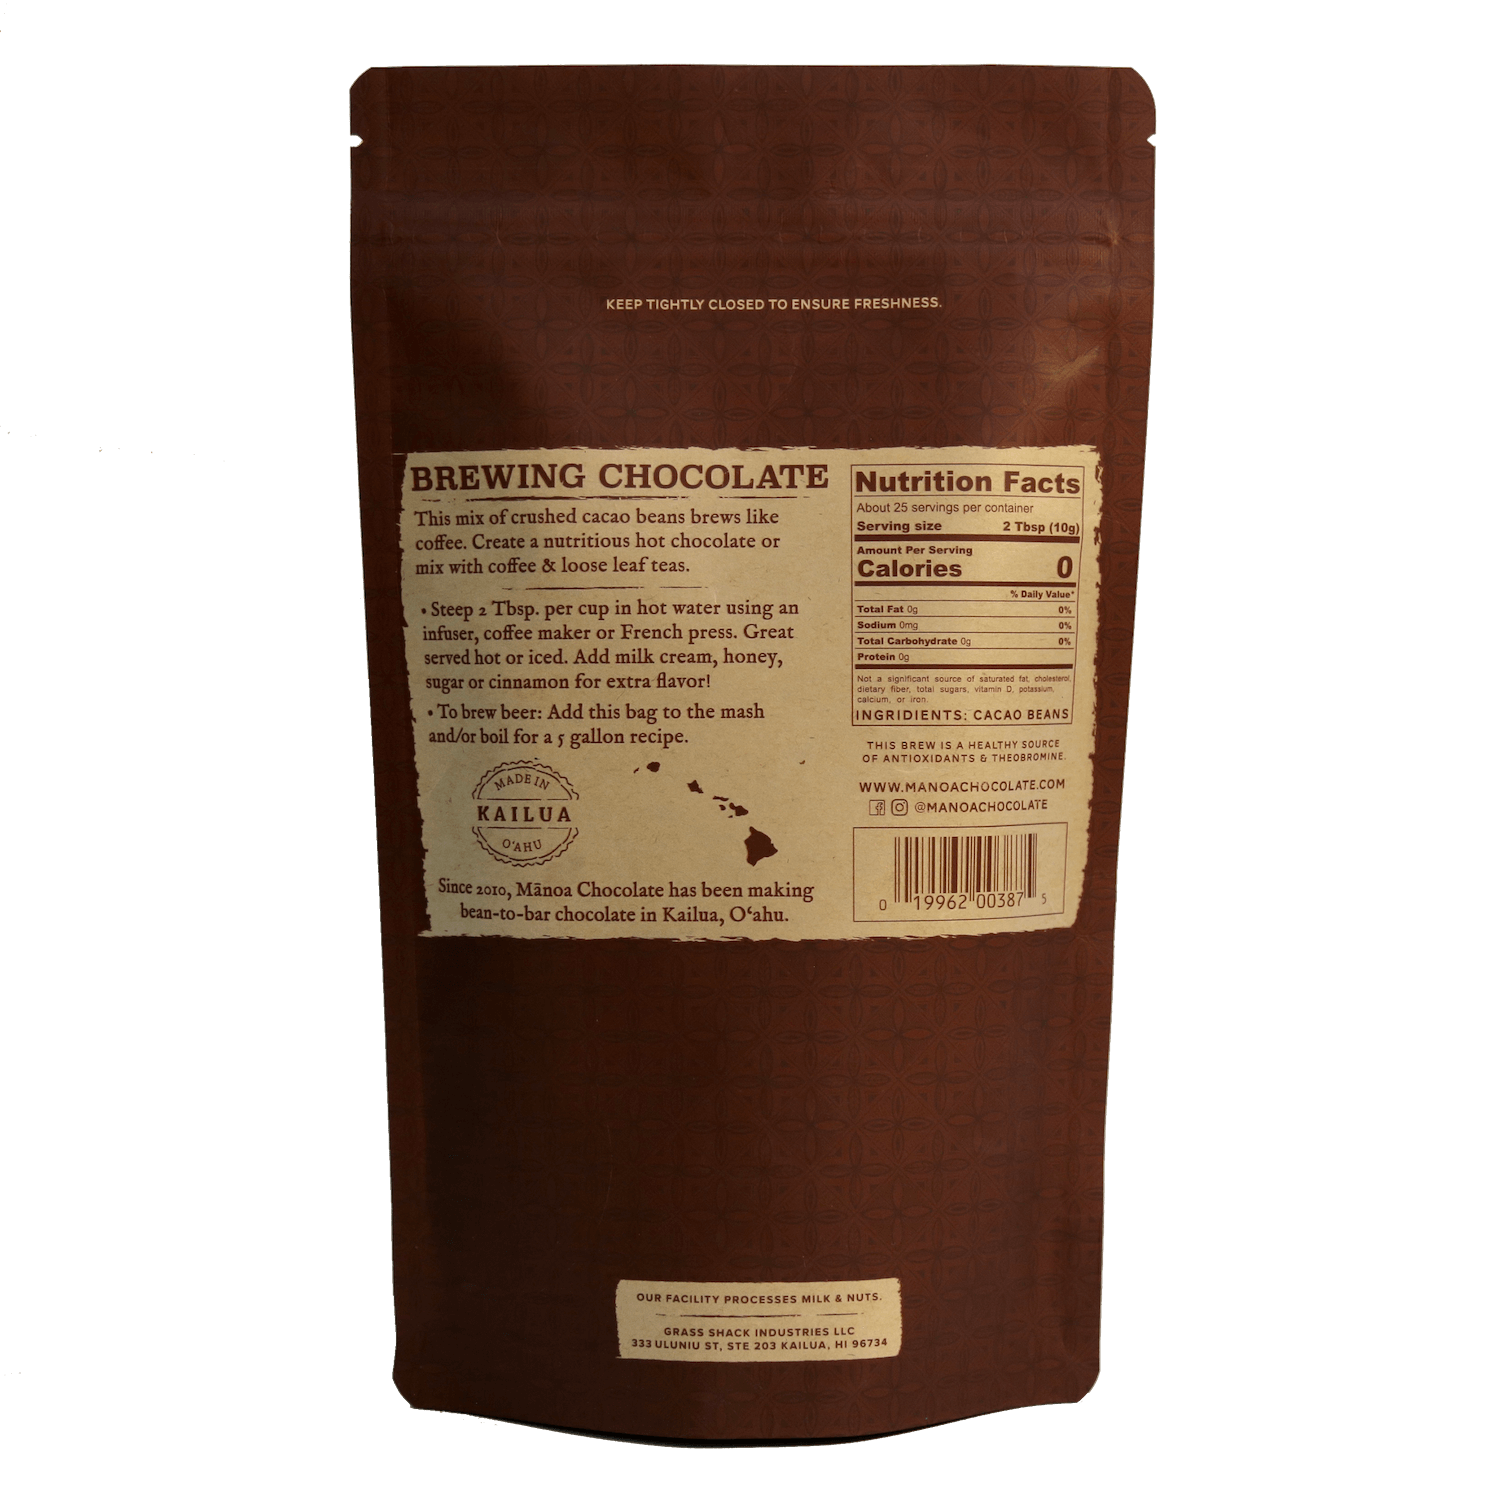 Image of the back of the pouch, including ingredient list and nutritional facts